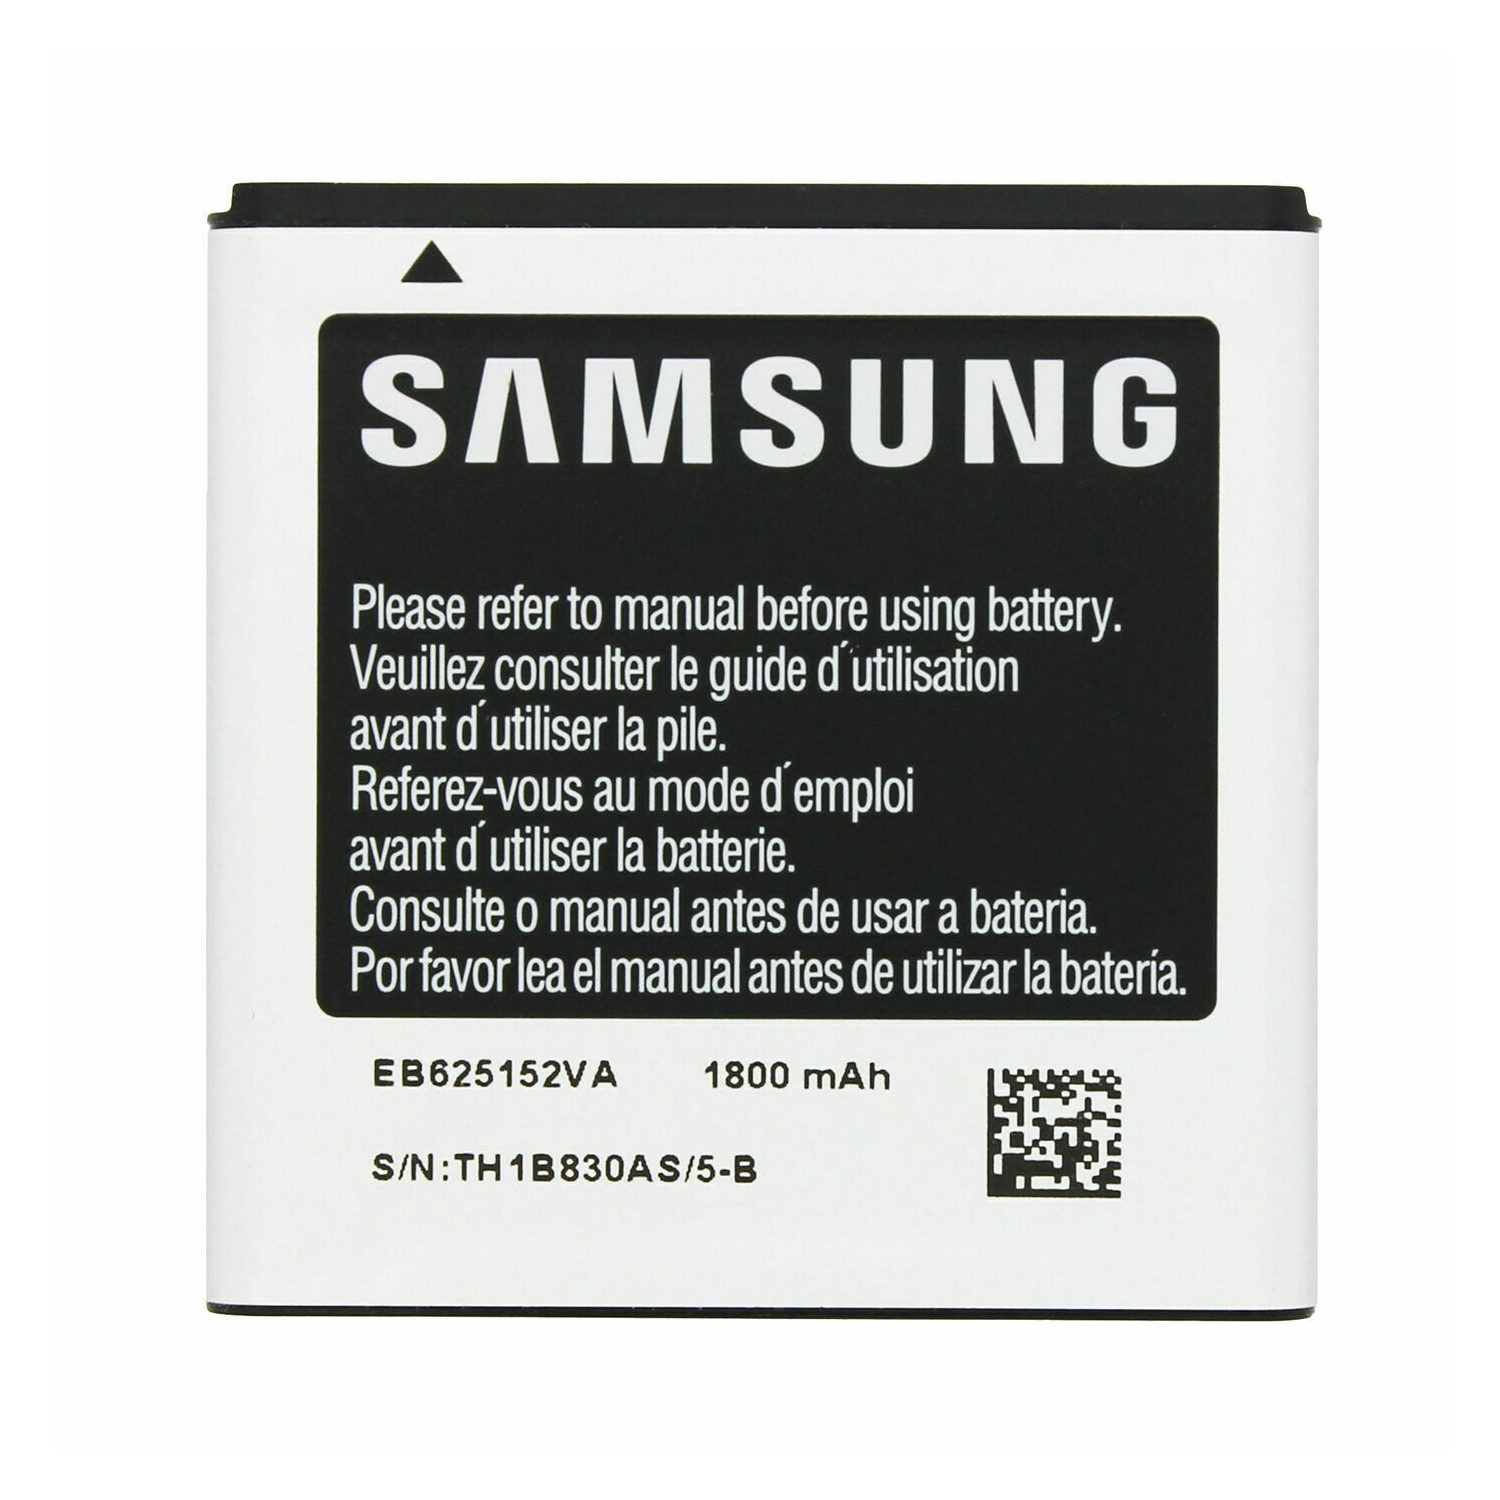 Replacement Battery for Samsung Galaxy Galaxy S II 2 Epic 4G Touch SPH-D710 SCH-R760, EB625152VA